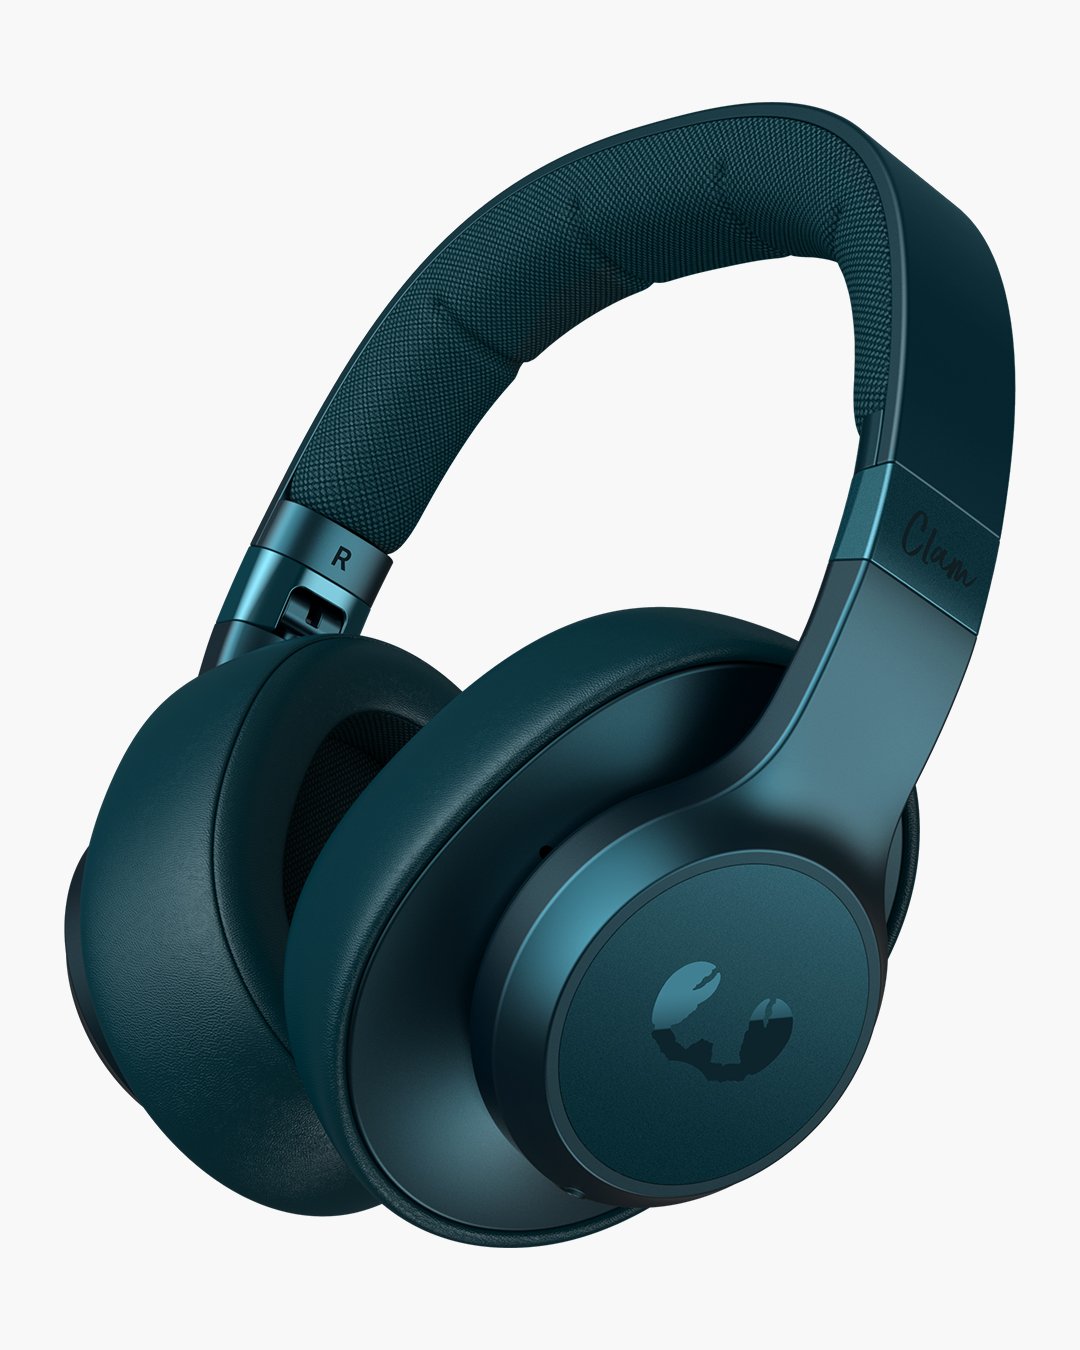 Fresh 'n Rebel - Clam ANC - Wireless over-ear headphones with active noise cancelling - Petrol Blue